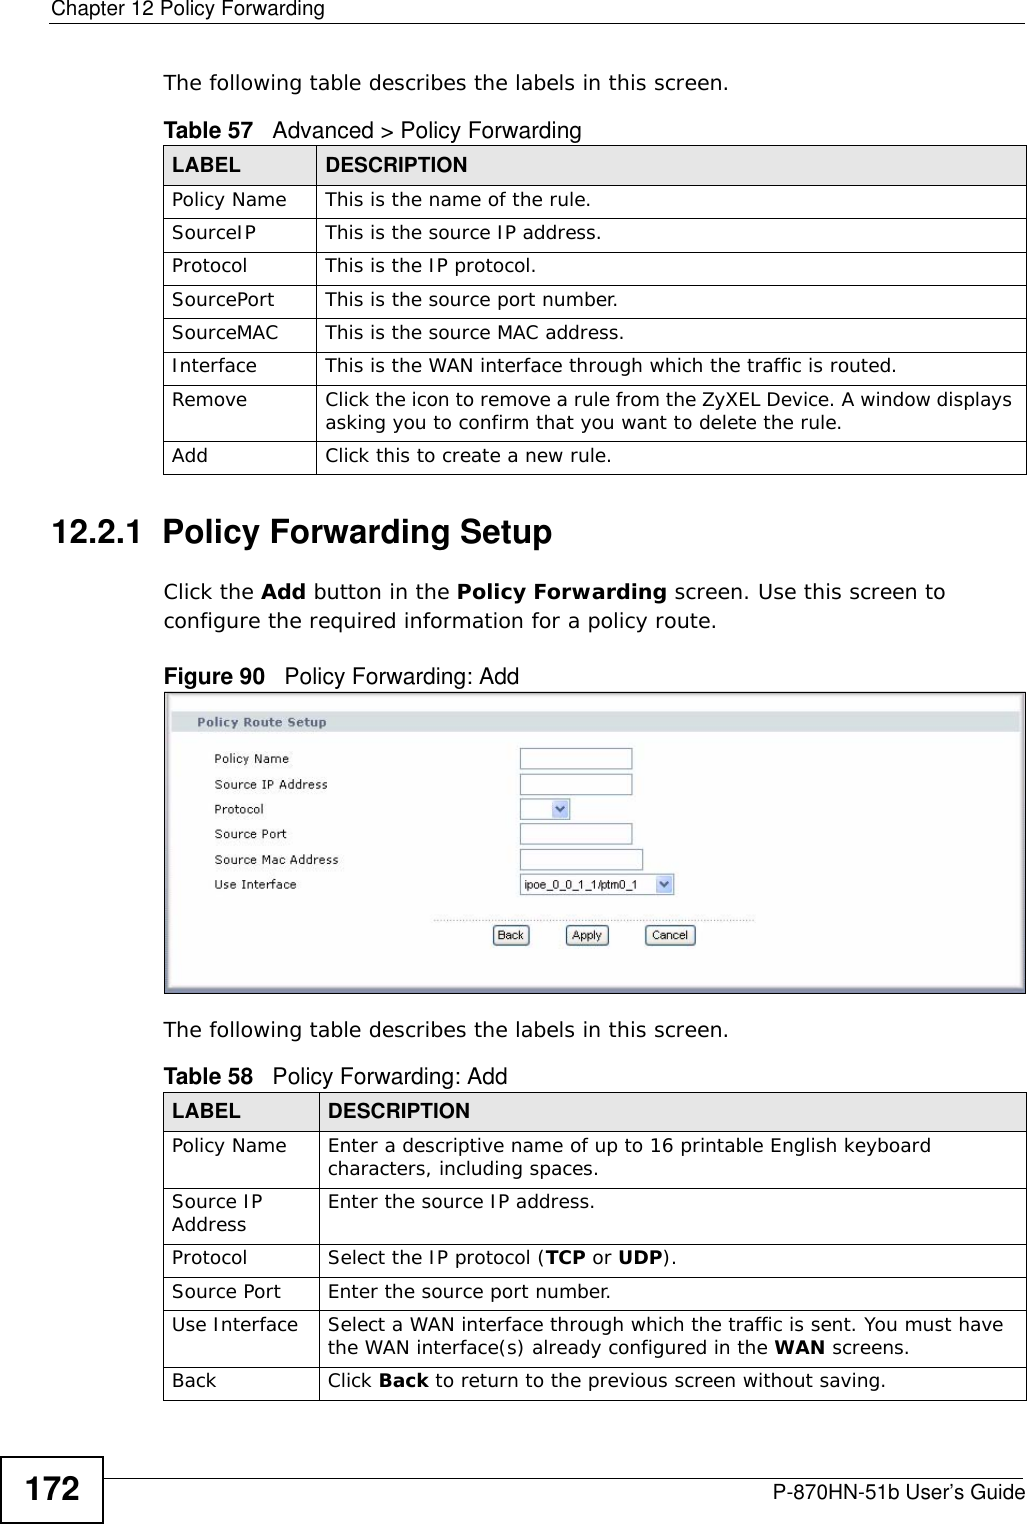 Chapter 12 Policy ForwardingP-870HN-51b User’s Guide172The following table describes the labels in this screen. 12.2.1  Policy Forwarding Setup   Click the Add button in the Policy Forwarding screen. Use this screen to configure the required information for a policy route. Figure 90   Policy Forwarding: Add The following table describes the labels in this screen. Table 57   Advanced &gt; Policy ForwardingLABEL DESCRIPTIONPolicy Name This is the name of the rule.SourceIP This is the source IP address.Protocol This is the IP protocol.SourcePort This is the source port number.SourceMAC This is the source MAC address.Interface This is the WAN interface through which the traffic is routed. Remove Click the icon to remove a rule from the ZyXEL Device. A window displays asking you to confirm that you want to delete the rule. Add Click this to create a new rule.Table 58   Policy Forwarding: AddLABEL DESCRIPTIONPolicy Name Enter a descriptive name of up to 16 printable English keyboard characters, including spaces. Source IP Address Enter the source IP address.Protocol Select the IP protocol (TCP or UDP).Source Port Enter the source port number. Use Interface Select a WAN interface through which the traffic is sent. You must have the WAN interface(s) already configured in the WAN screens.Back Click Back to return to the previous screen without saving.